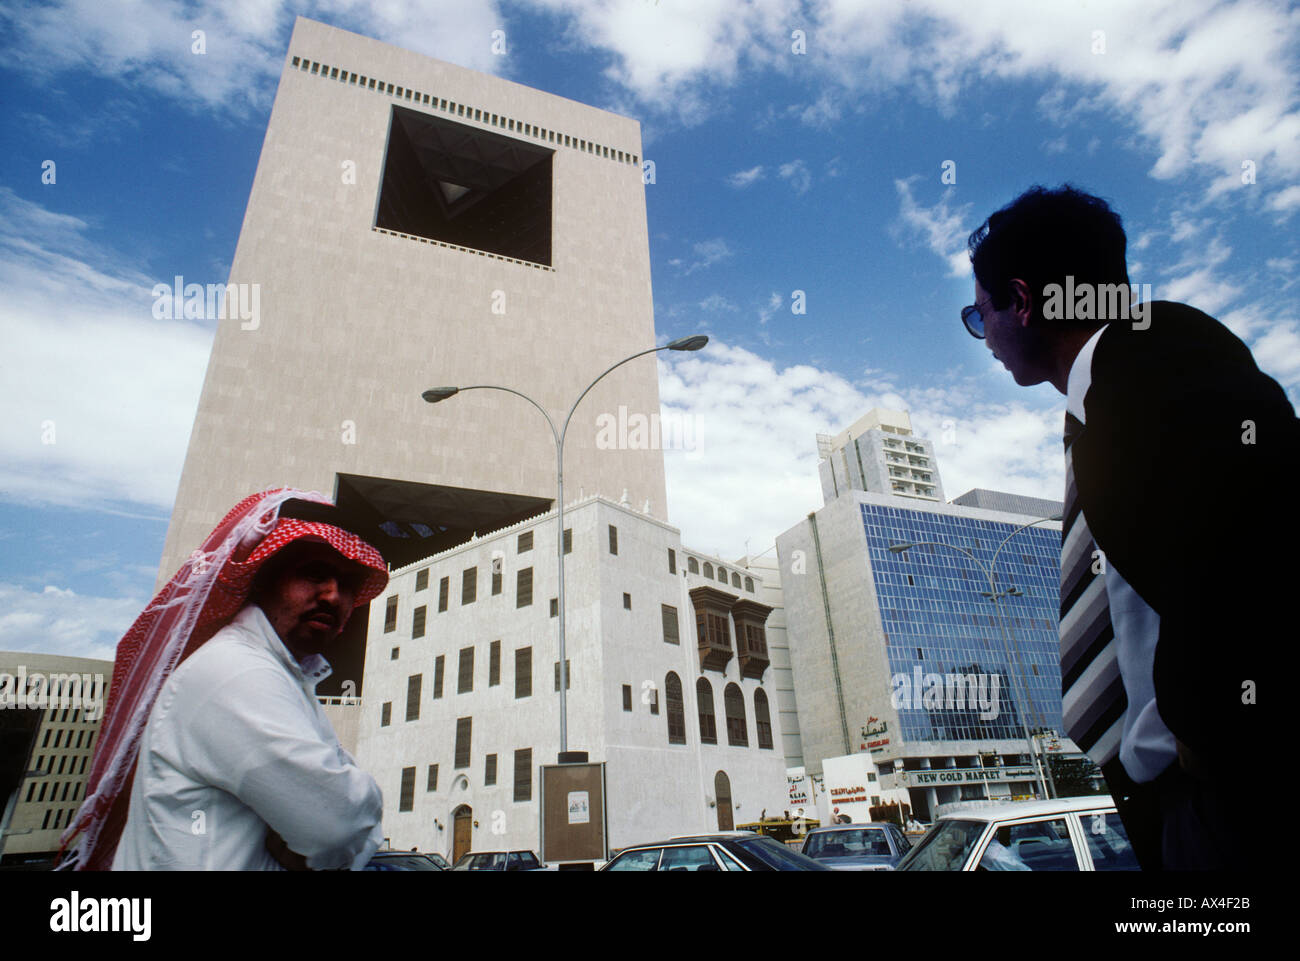 Arab men in traditional and western dress by the National Commercial Bank s building in Jeddah Saudi Arabia Stock Photo